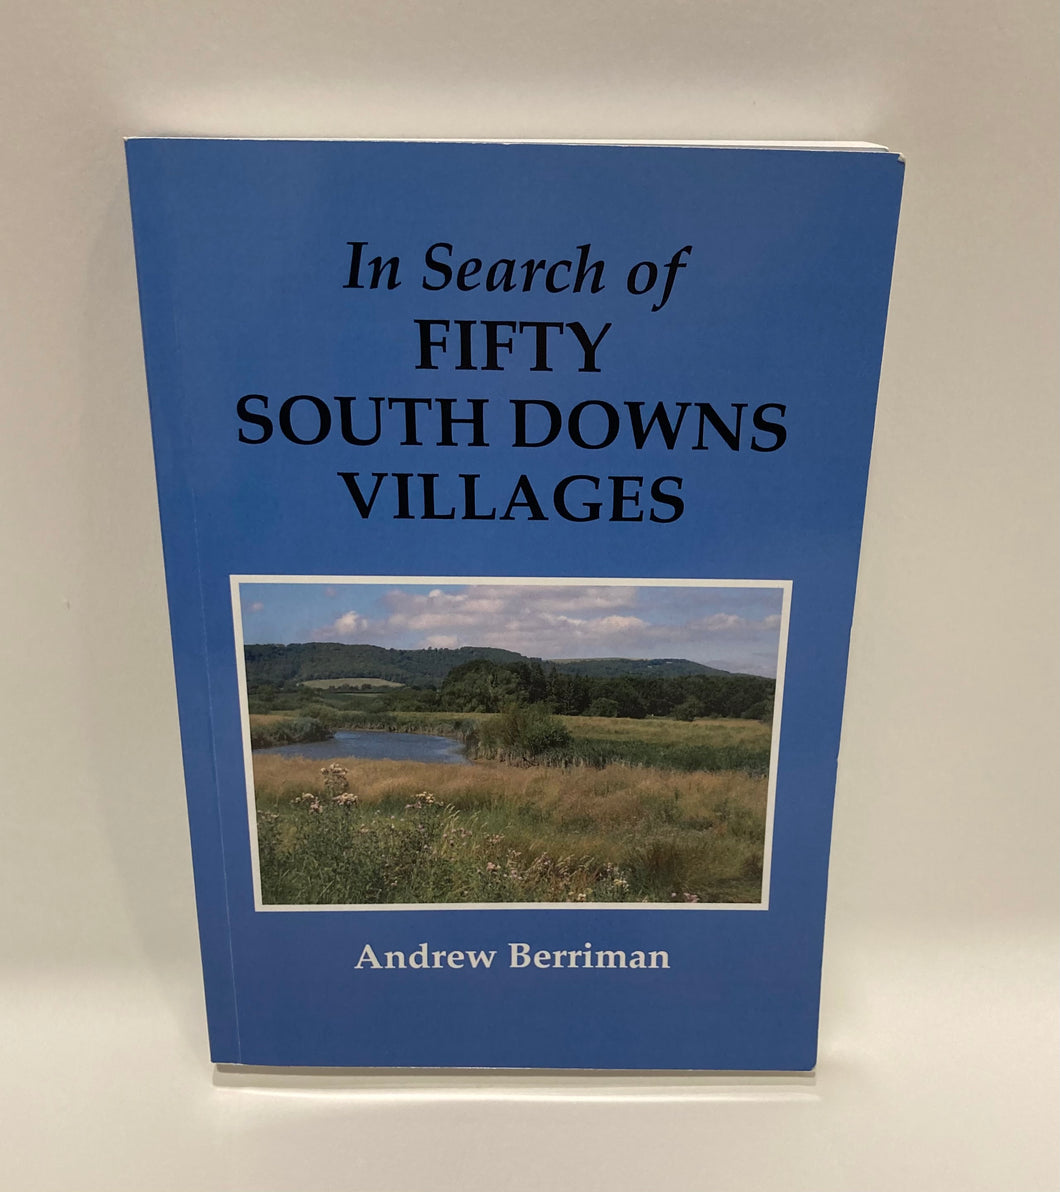 In Search of Fifty South Downs Villages